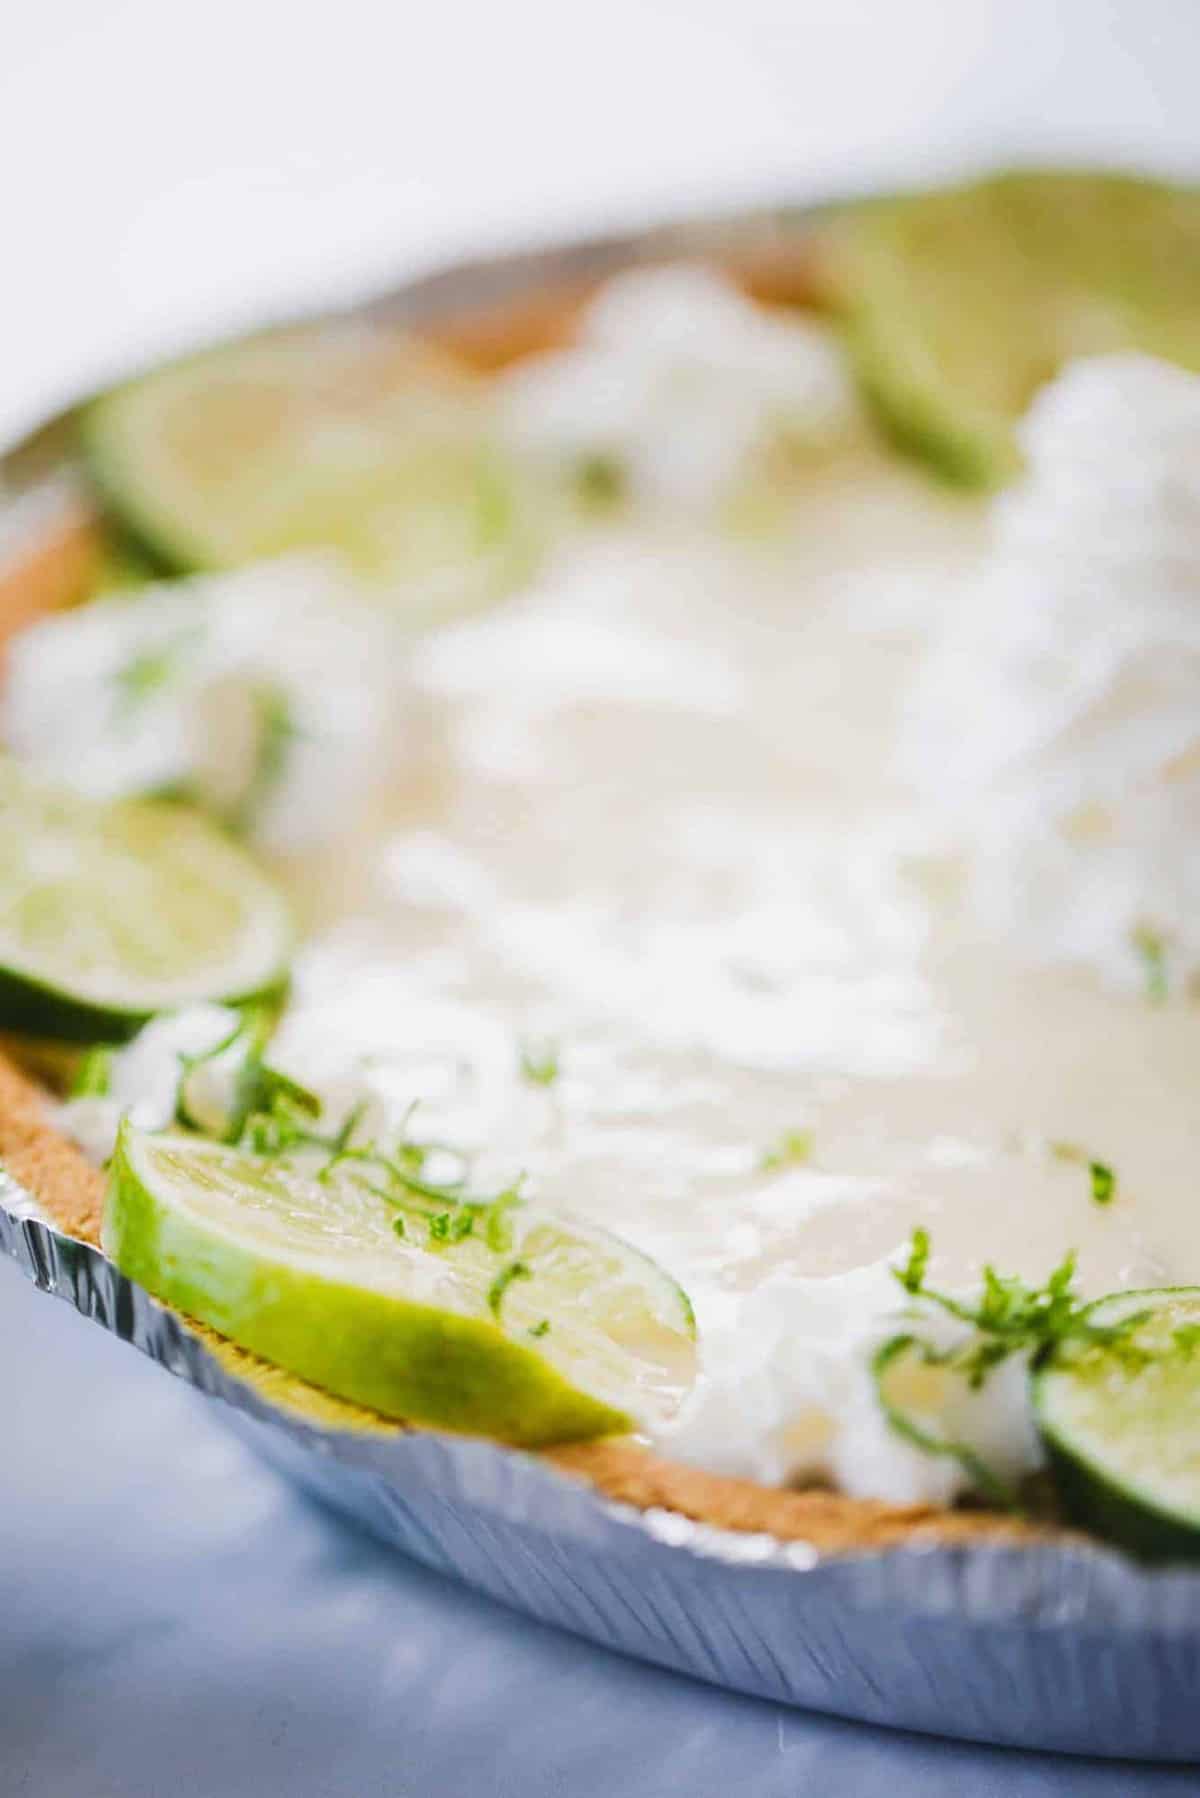 Key Lime Pie sits on a counter, adorned with slices of lime and whipped cream.